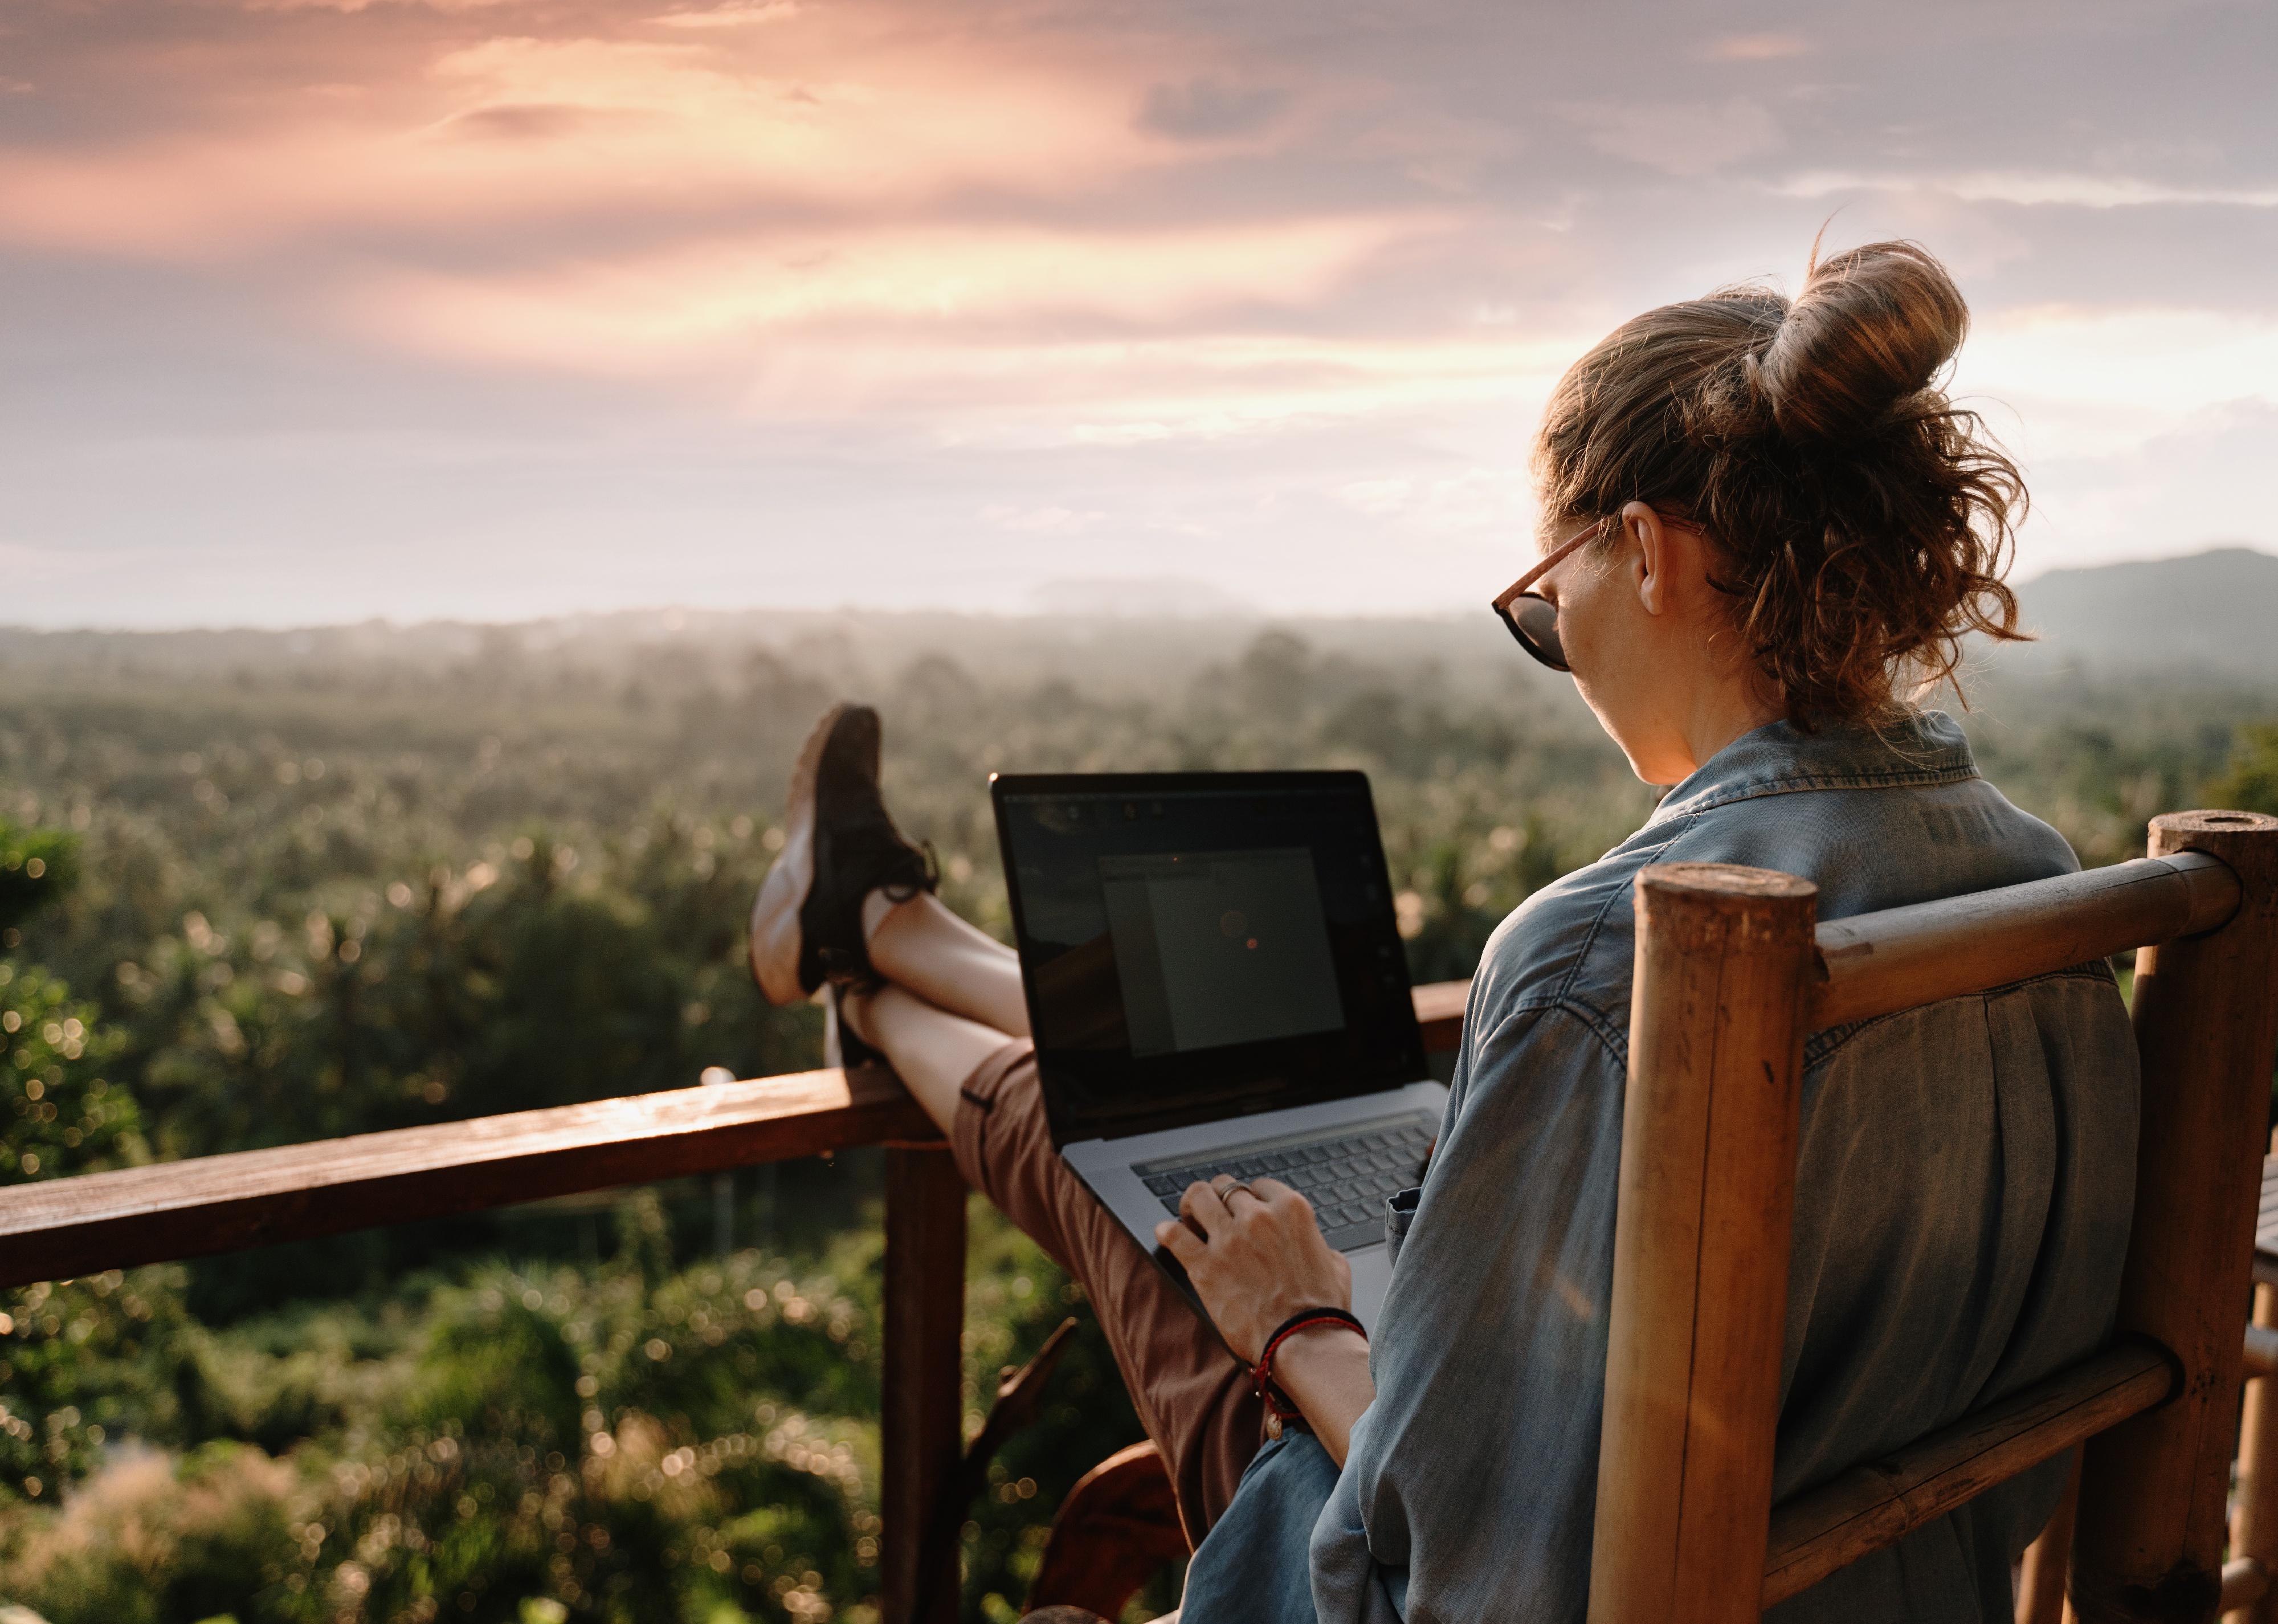 A woman works on her laptop from a balcony overlooking trees